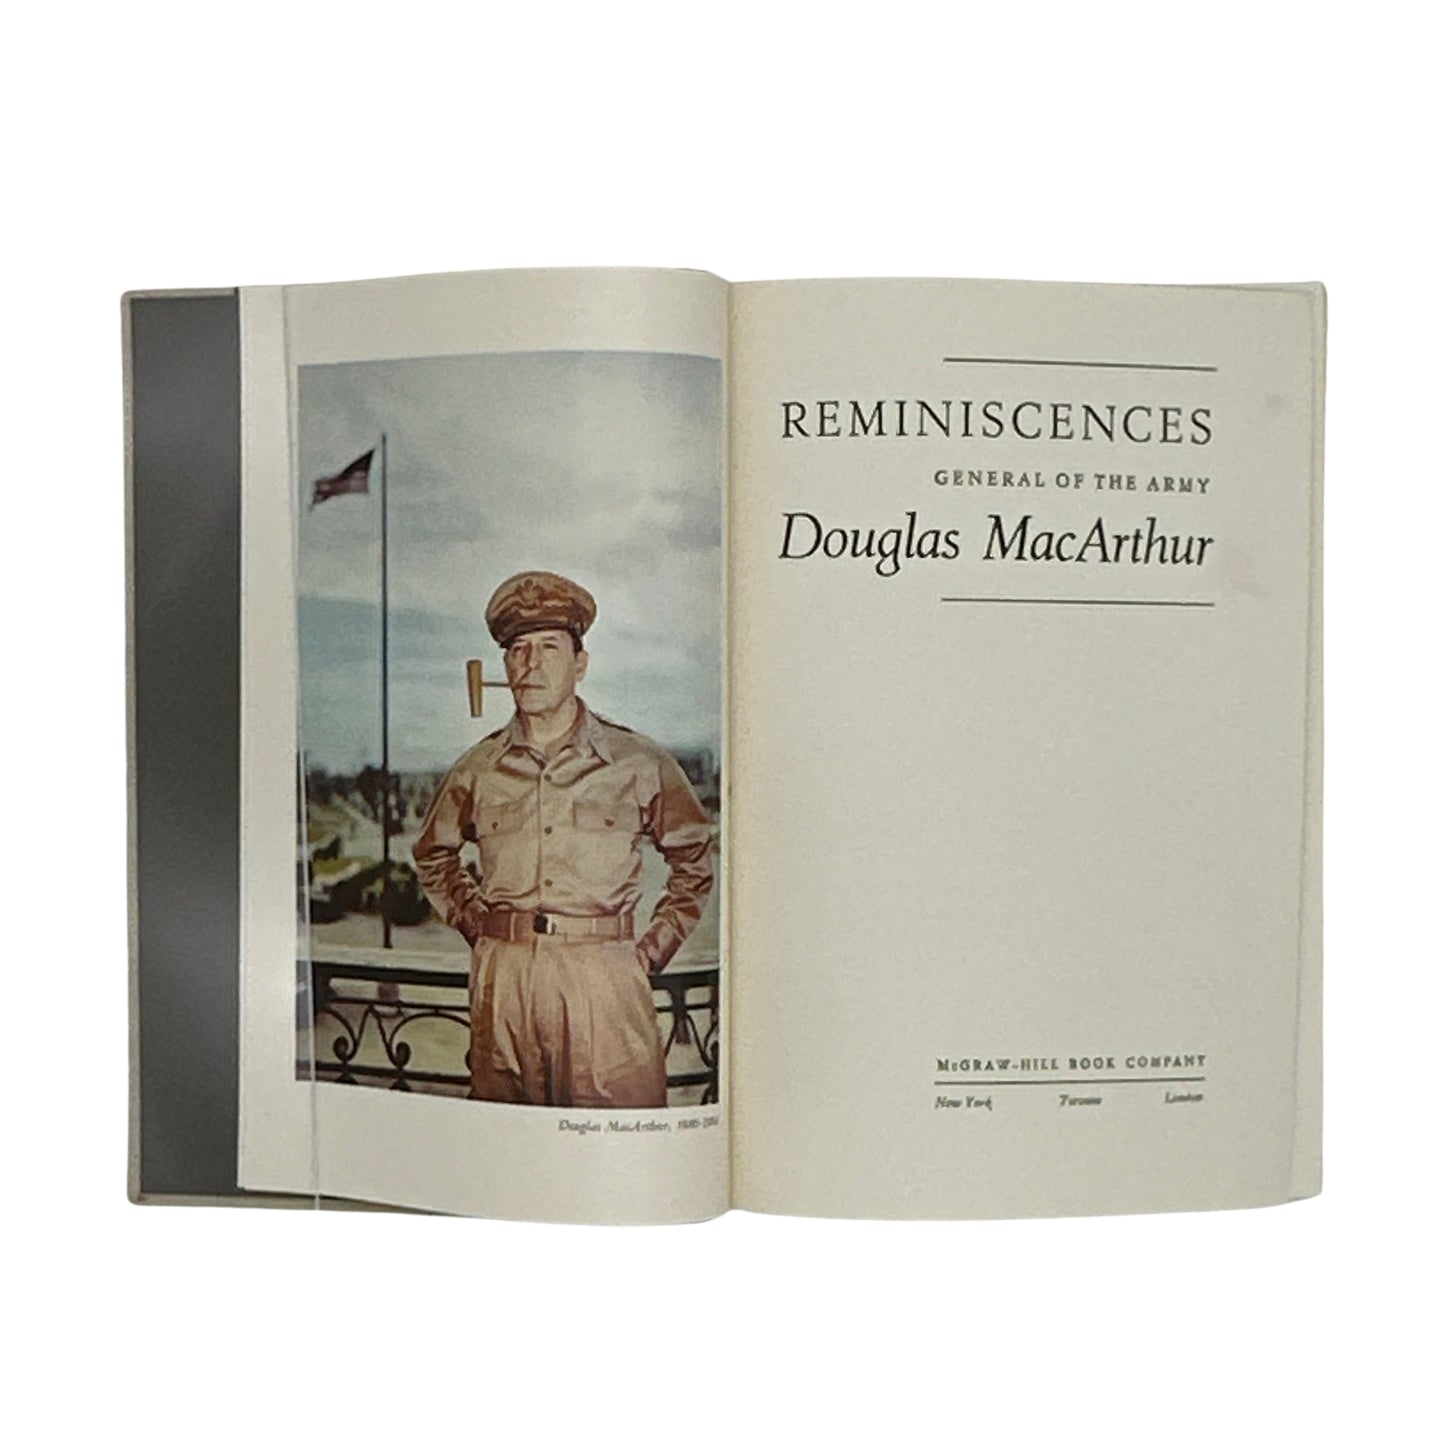 "Reminiscences" signed by the author General Douglas MacArthur, 1964 - First edition, #1486 of 1750 signed copies